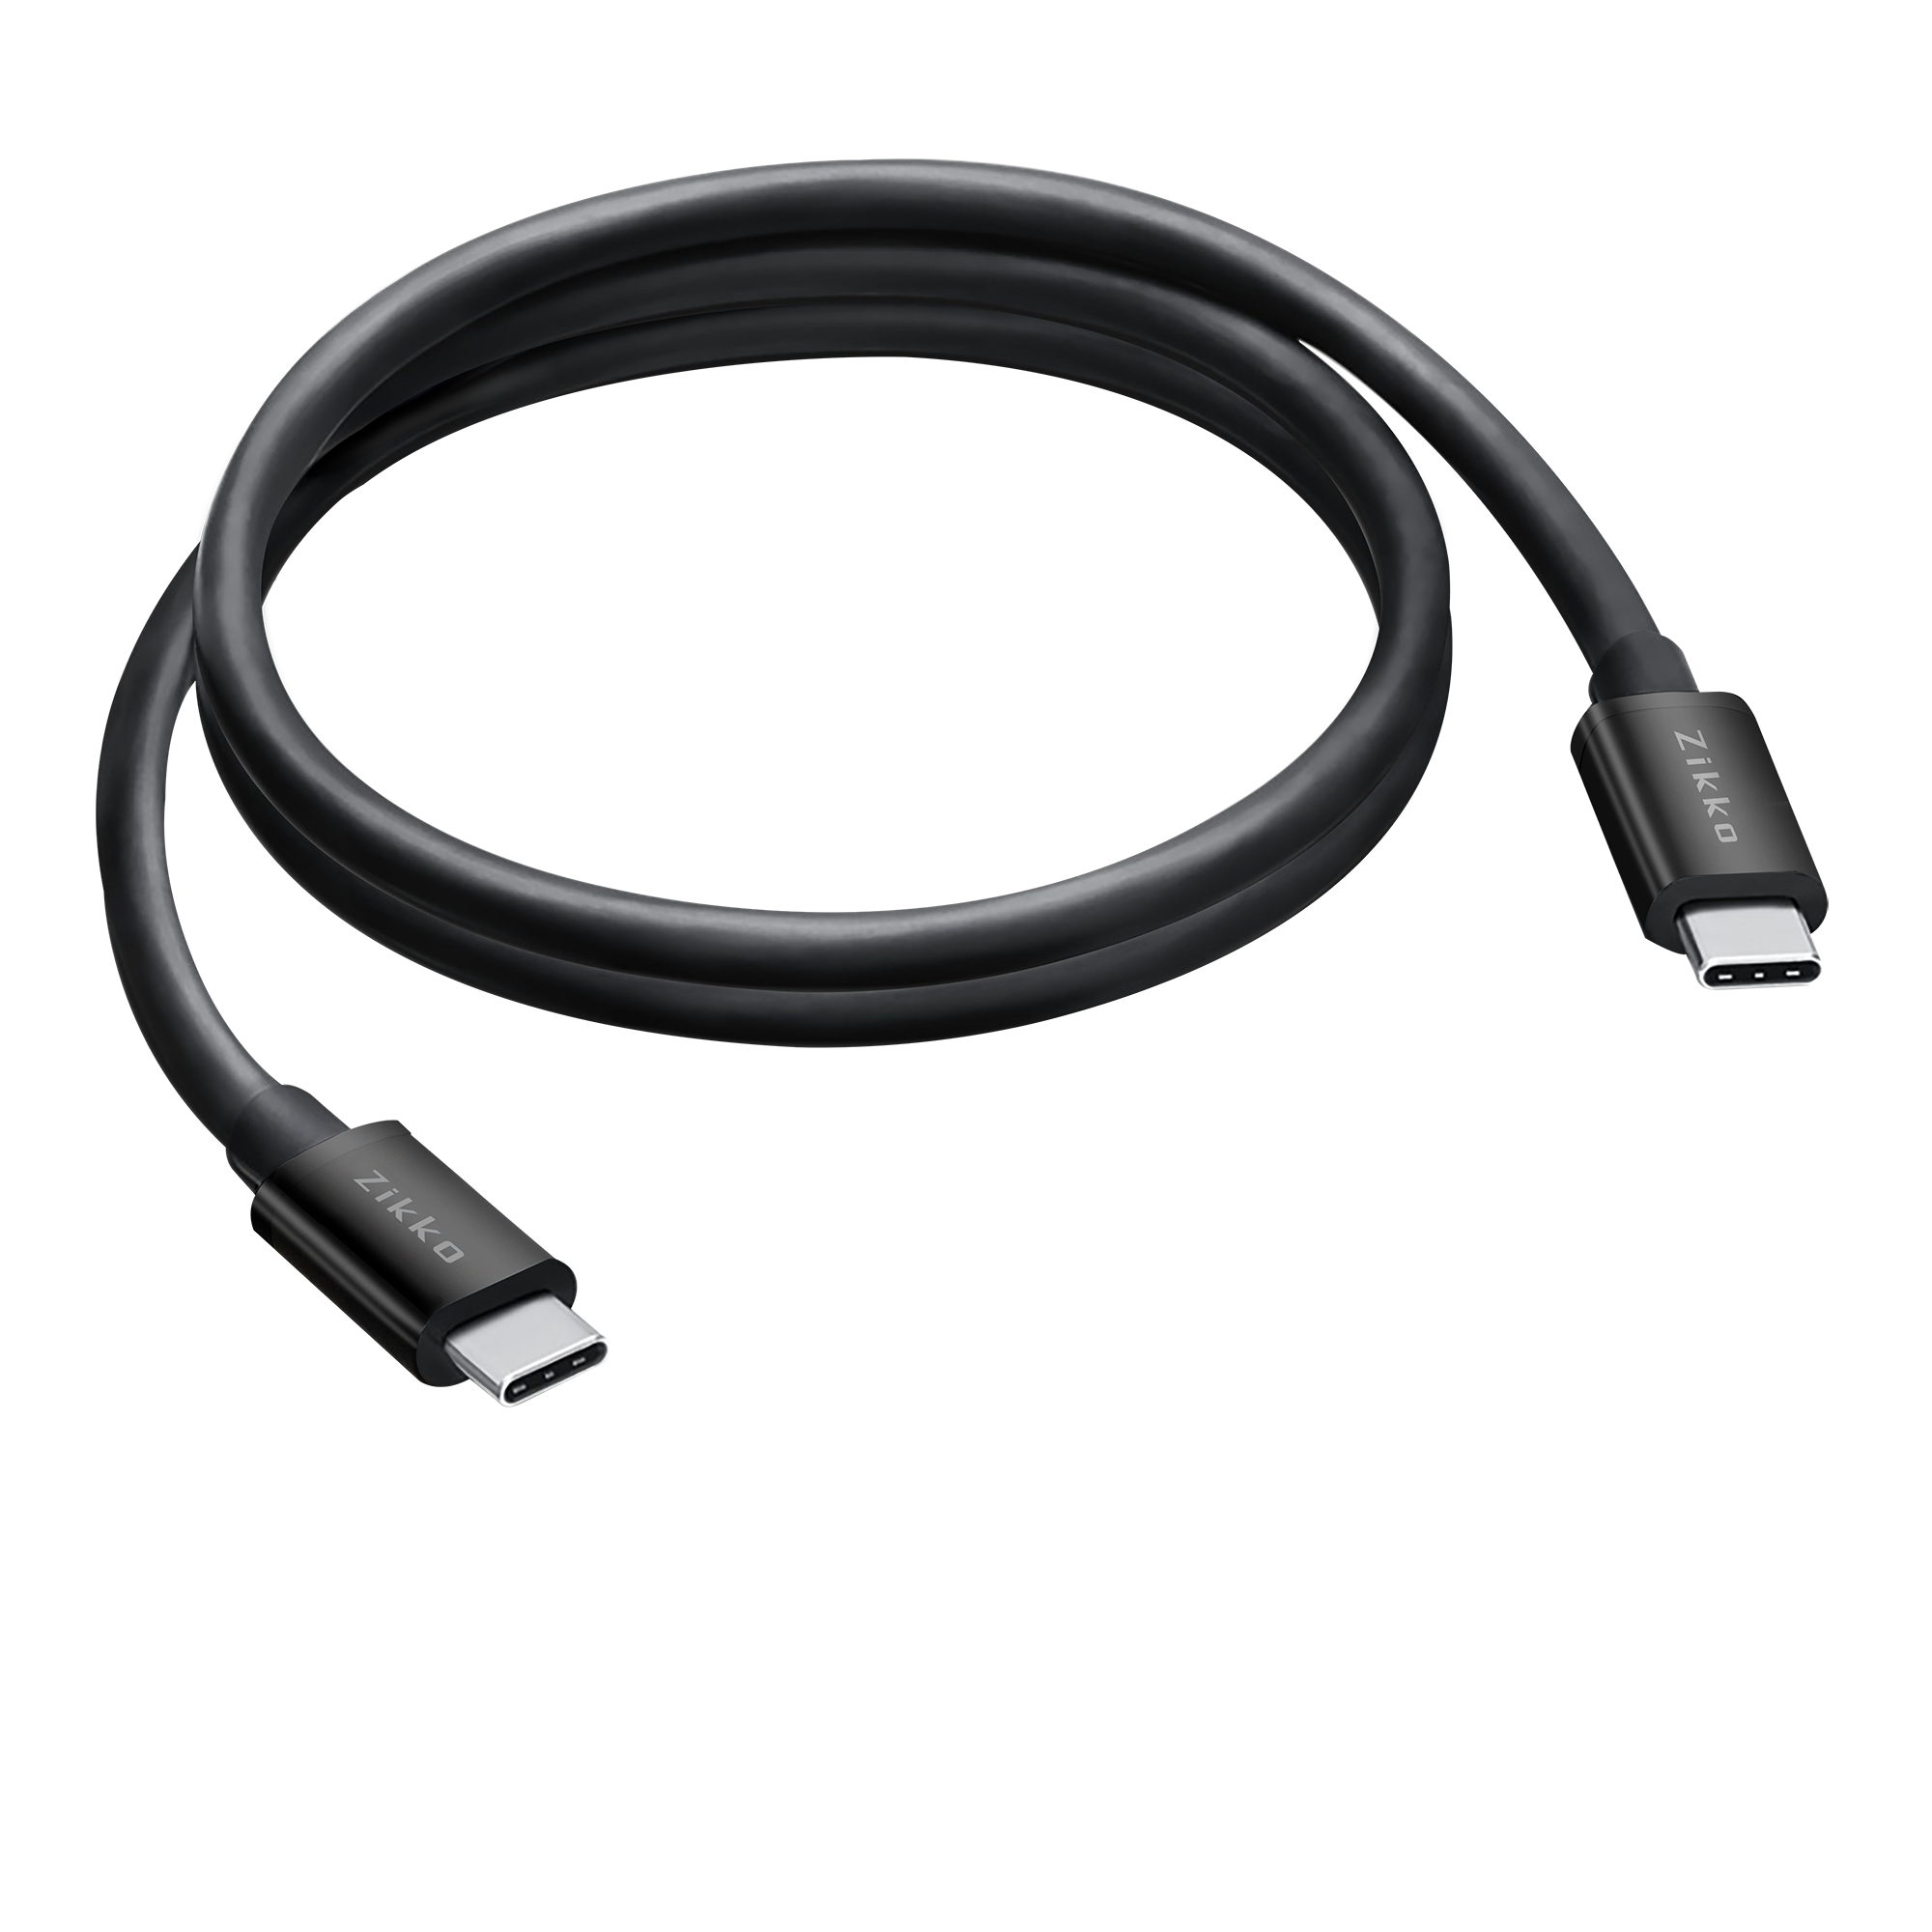 Thunderbolt 3 Cable（0.5 meter & 0.8 meter）